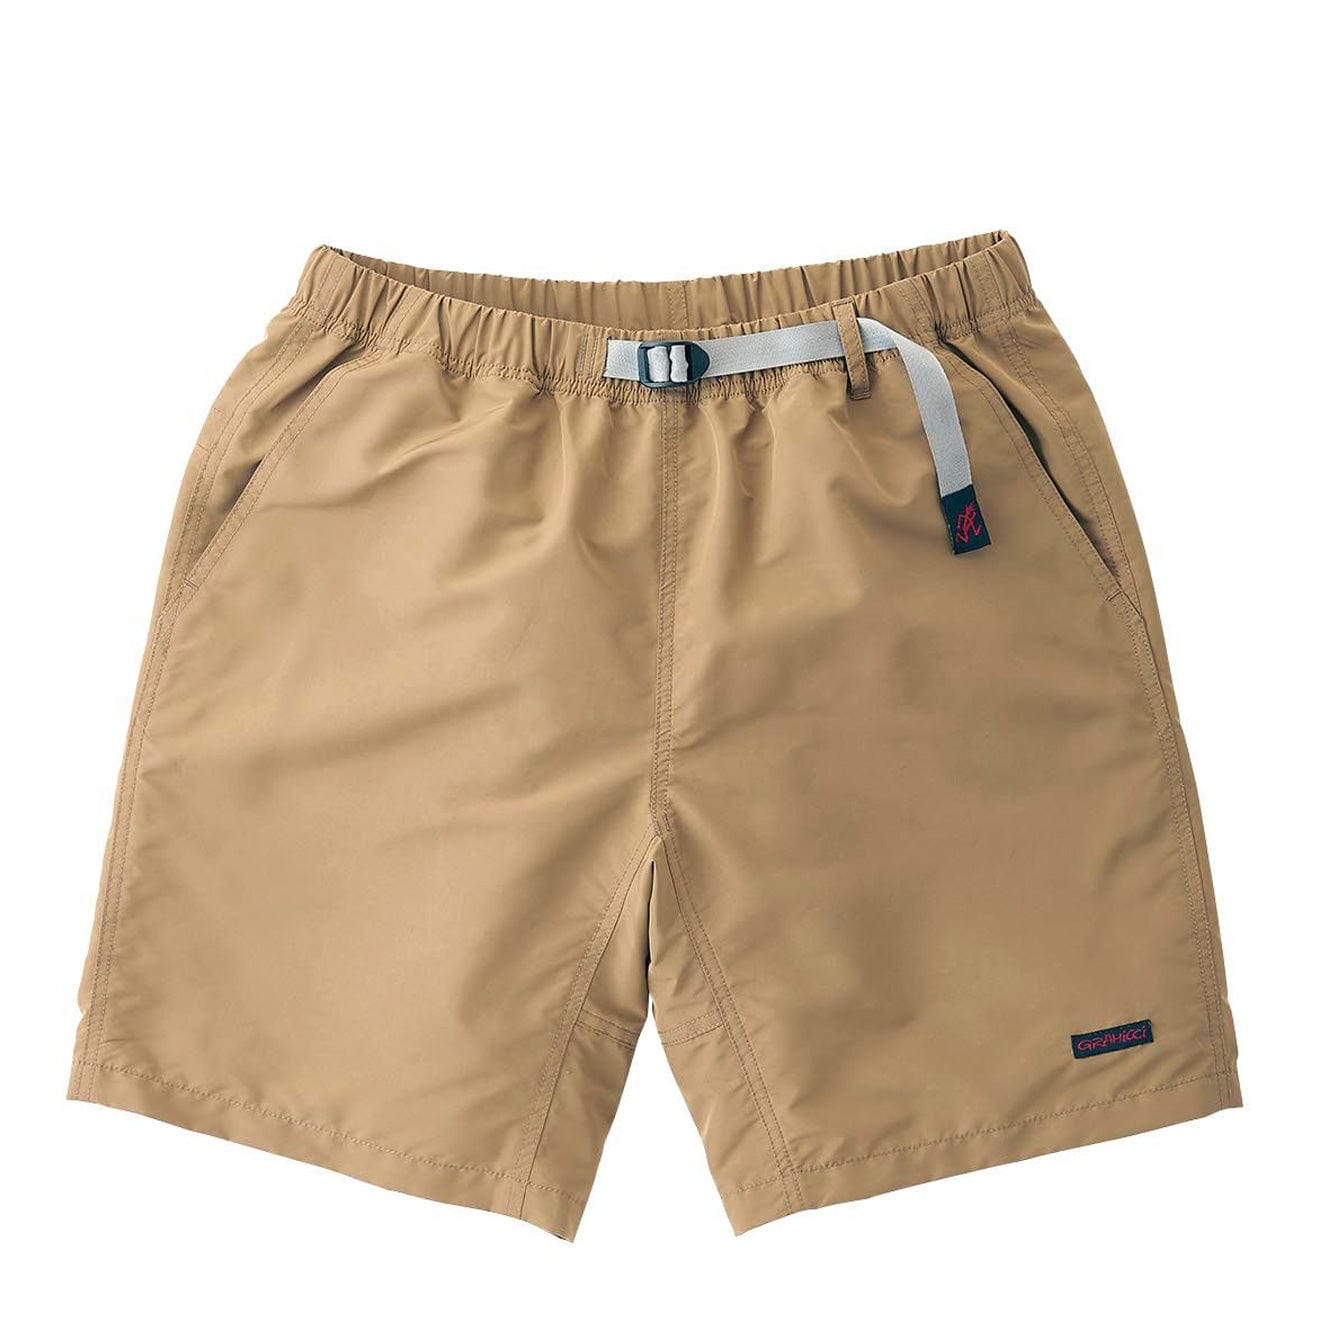 Gramicci Shell Packable Shorts Tan | The Sporting Lodge